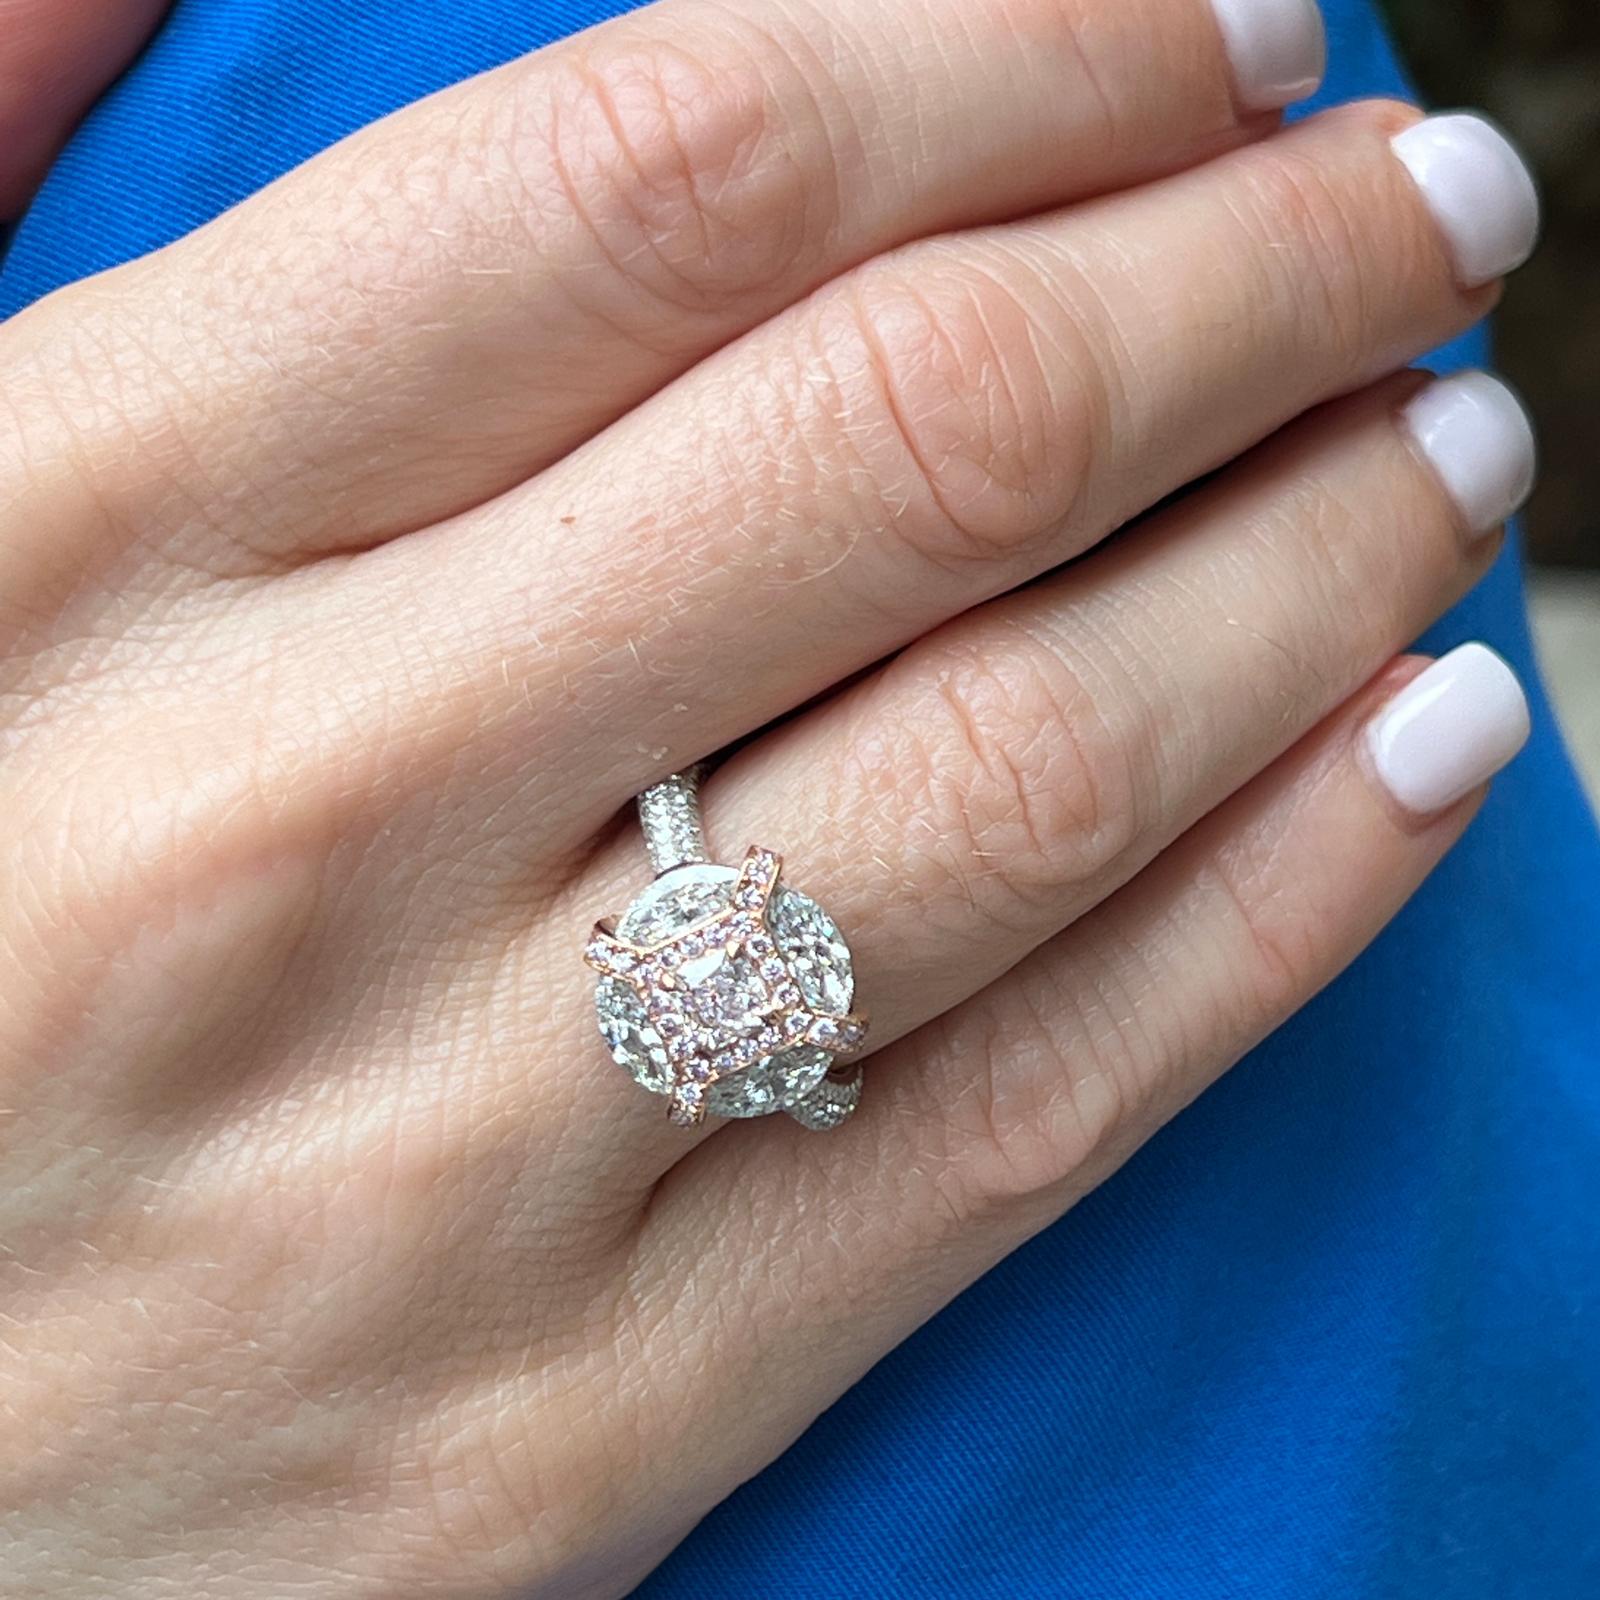 Fabulous natural pink diamond engagement ring fashioned in 18 karat white and rose gold. The ring features a .45 carat radiant cut natural light pink diamond graded by the GIA VLP/SI1 (see report in the photos section). The pink diamond is